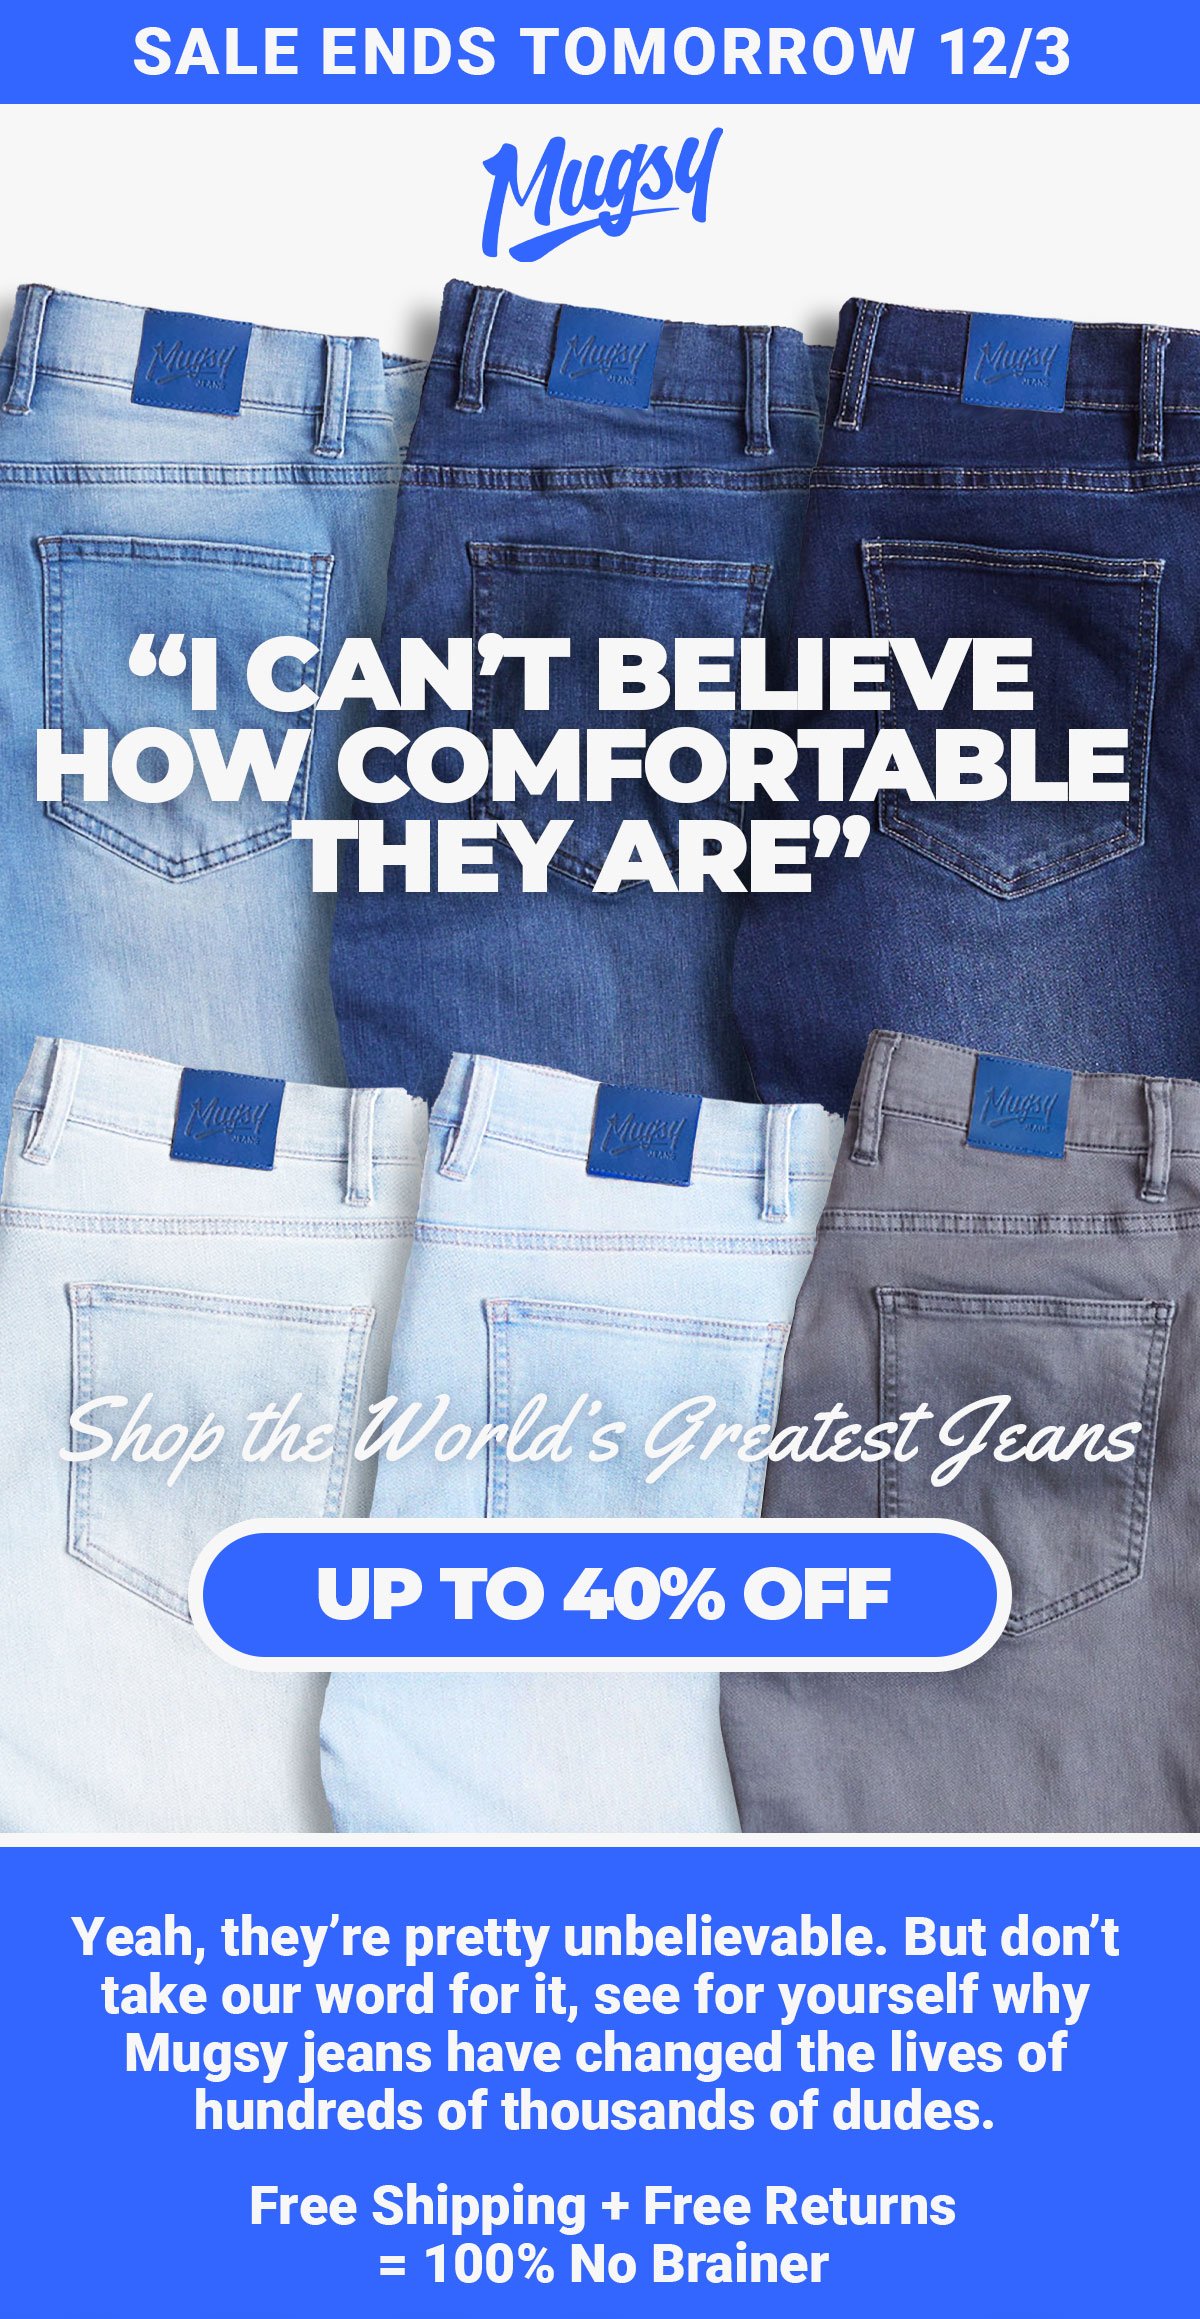 Sale ends tomorrow 12/3. Mugsy. Shpo the world's greatest jeans. Up to 40% Off. Yeah, they’re pretty unbelievable. But don’t take our word for it, see for yourself why Mugsy jeans have changed the lives of hundreds of thousands of dudes. Free Shipping + Free Returns = 100% No Brainer.